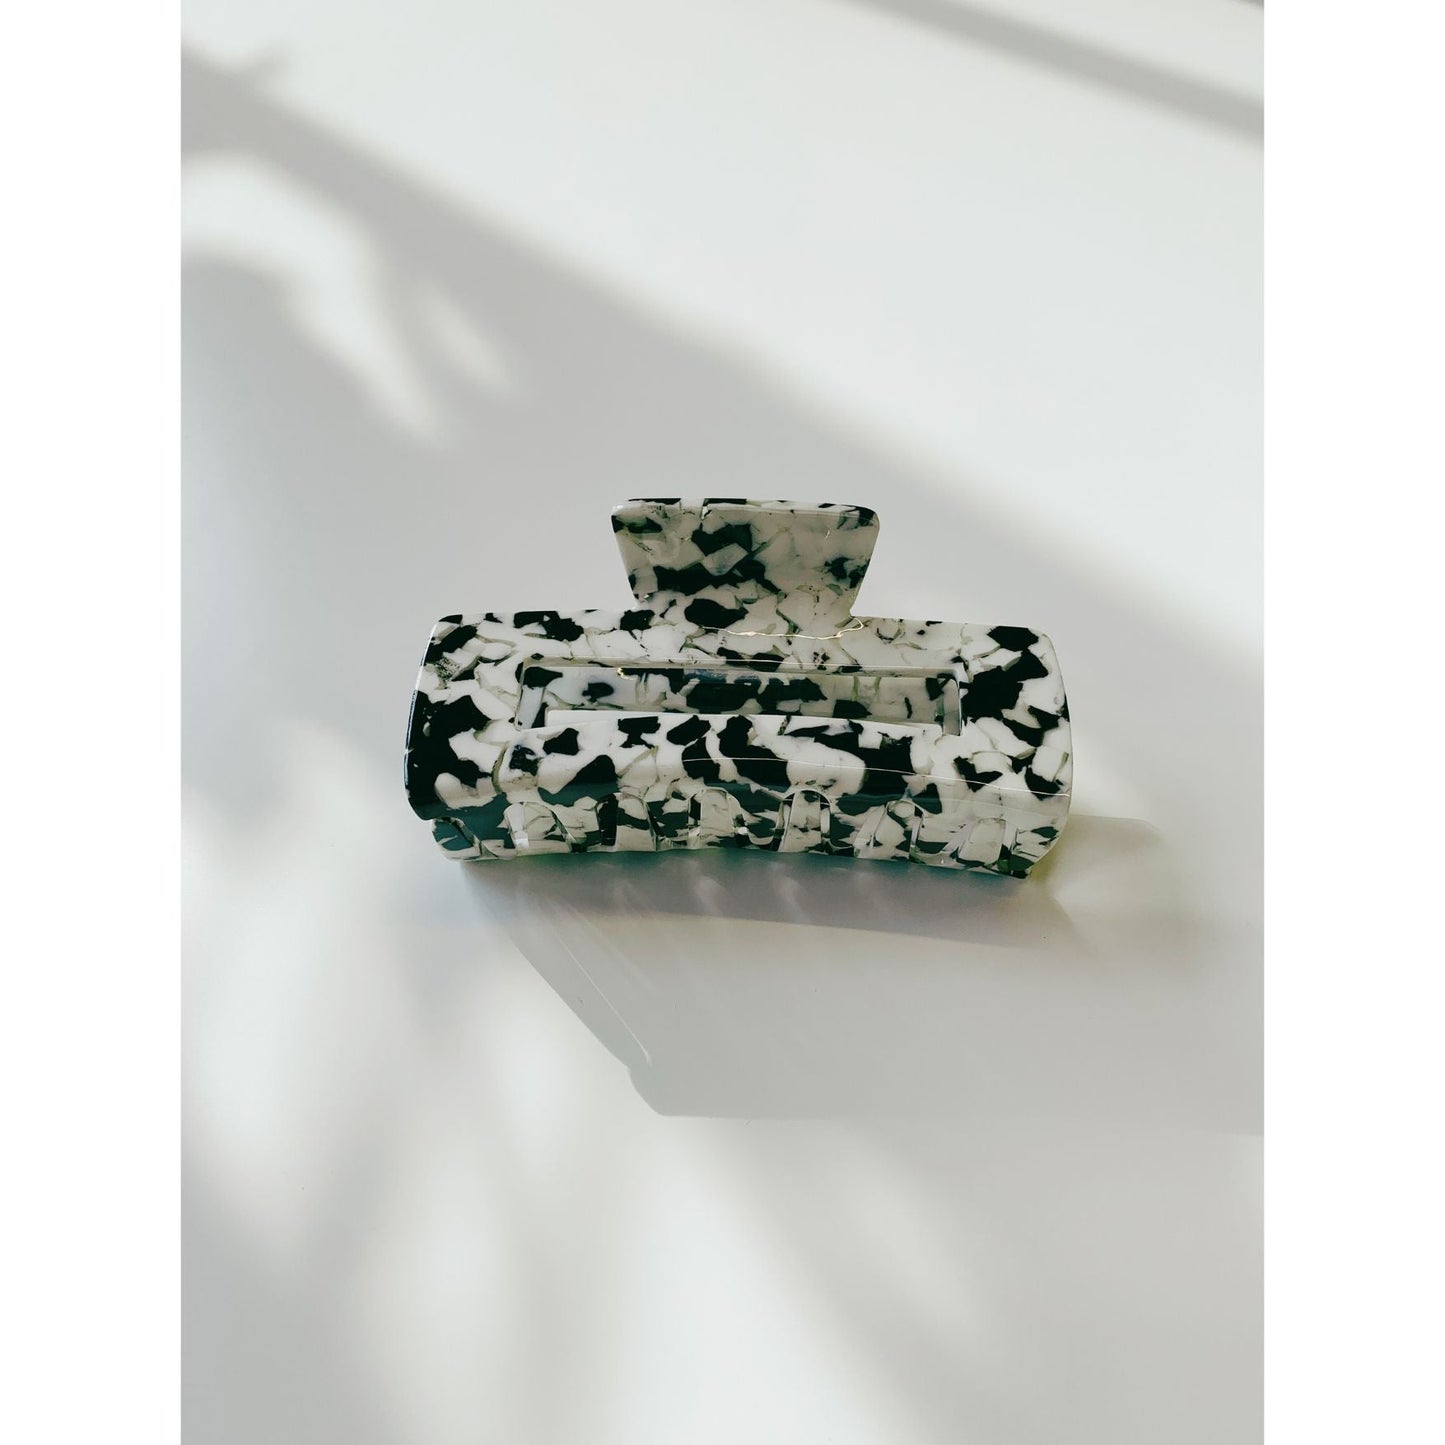 Velvet Claws Hair Clip | The Diana in Black and White Marble | Claw Clip in Velvet Travel Bag